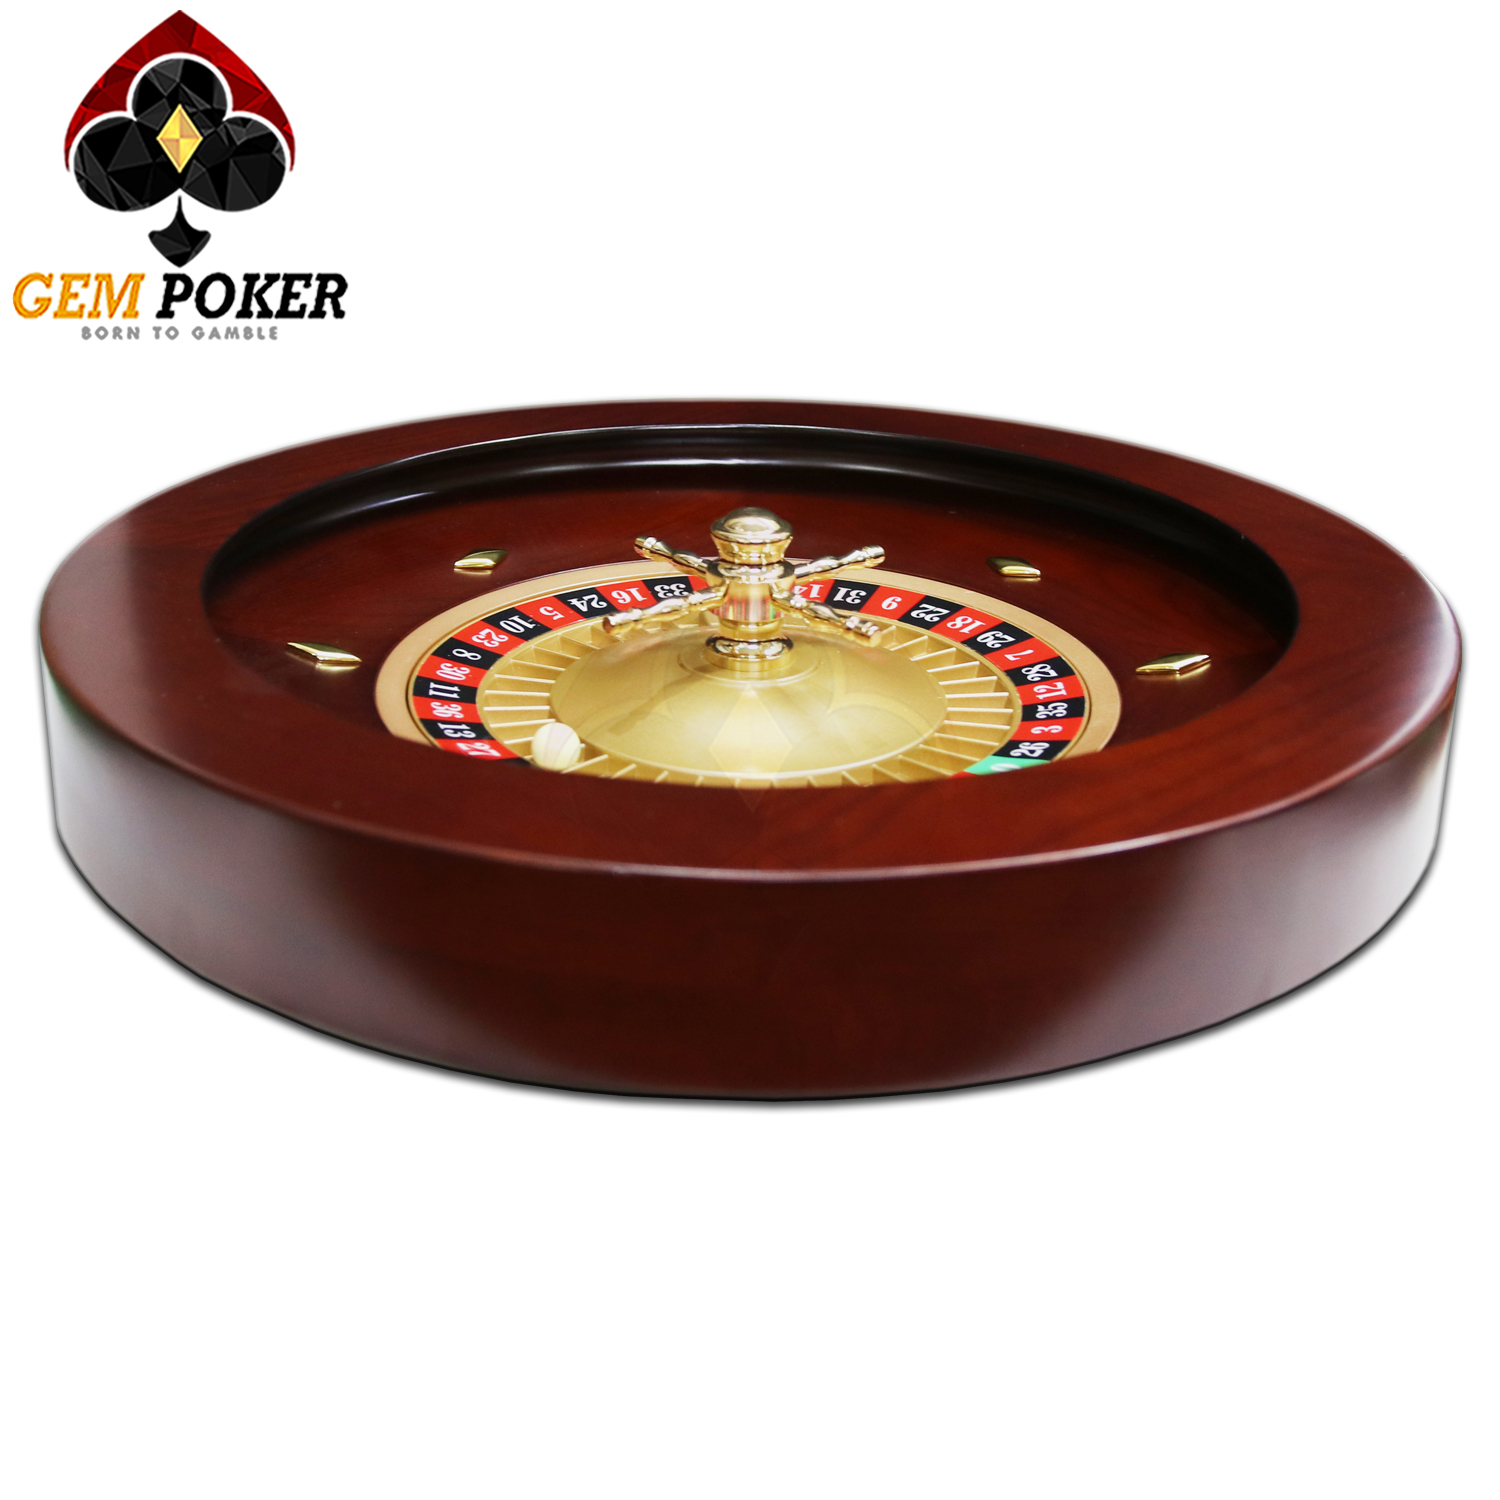 ROULETTE WHEEL 18" EUROPE STYLE